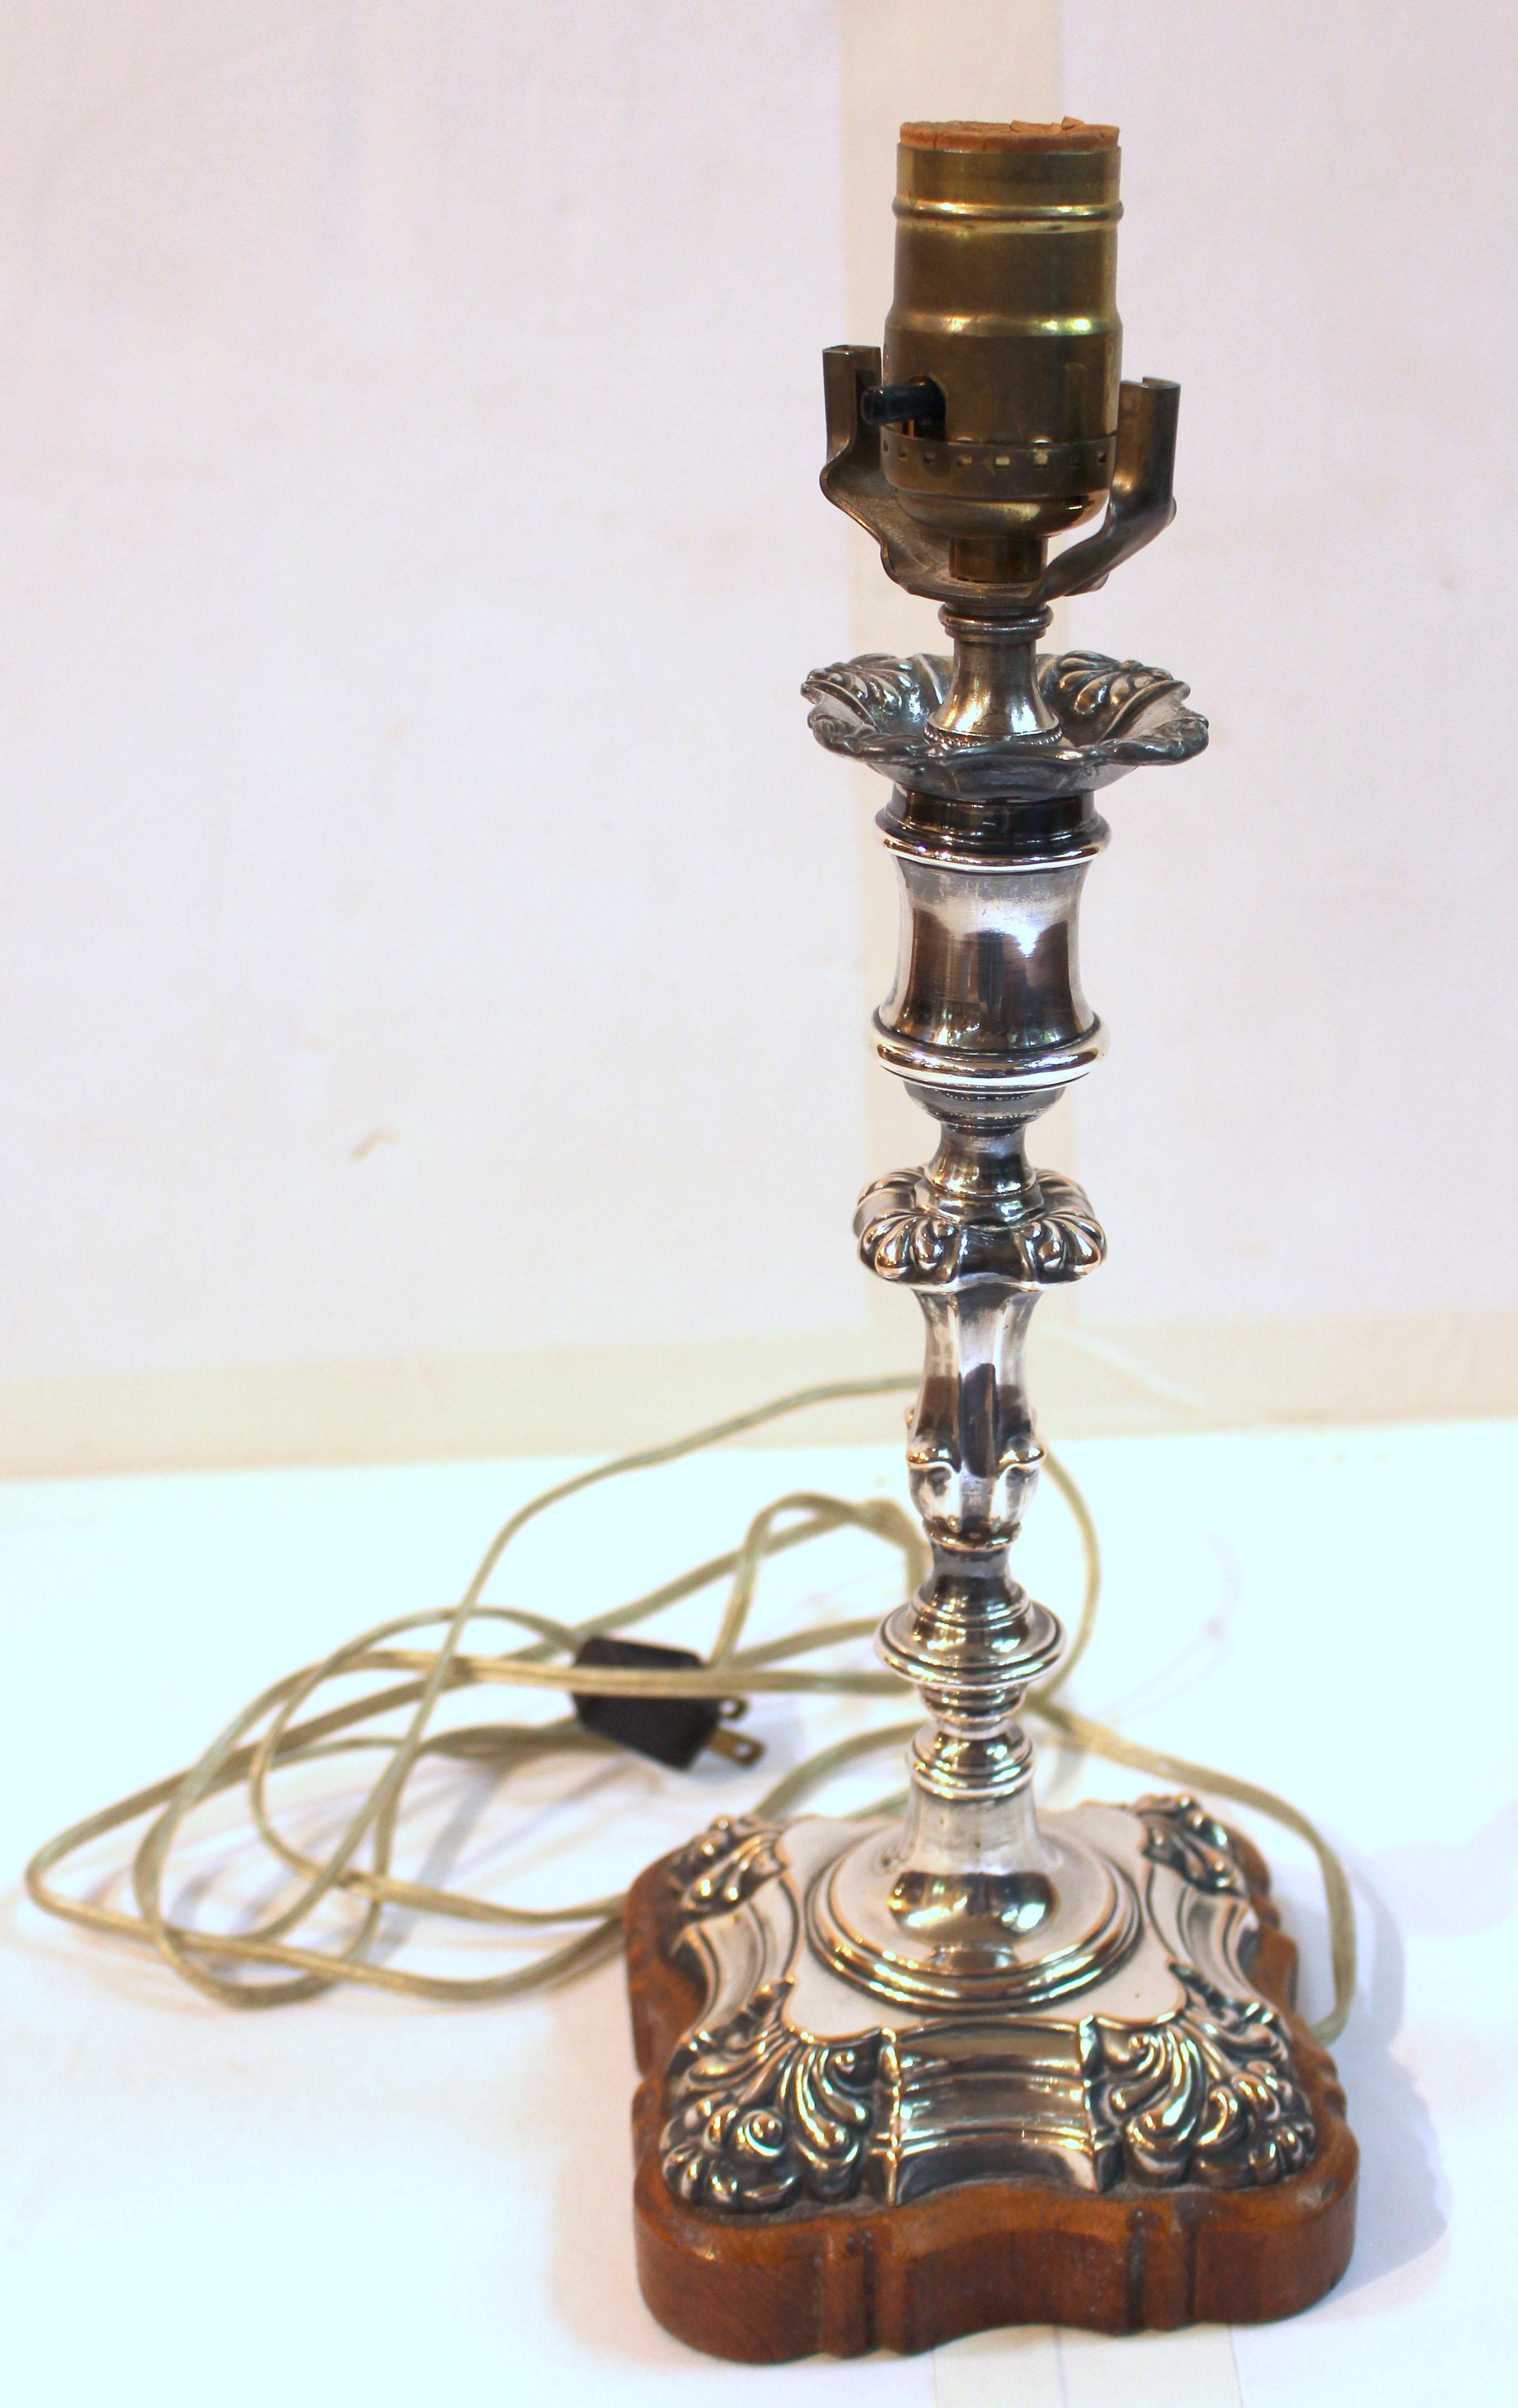 Circa 1820 Old Sheffield plate silver candlestick now as a lamp. Rococo revival design. Originally electrified in England on a custom conforming oak base. Lamps Ltd of Durham refitted electrification to US standards.
13 1/4